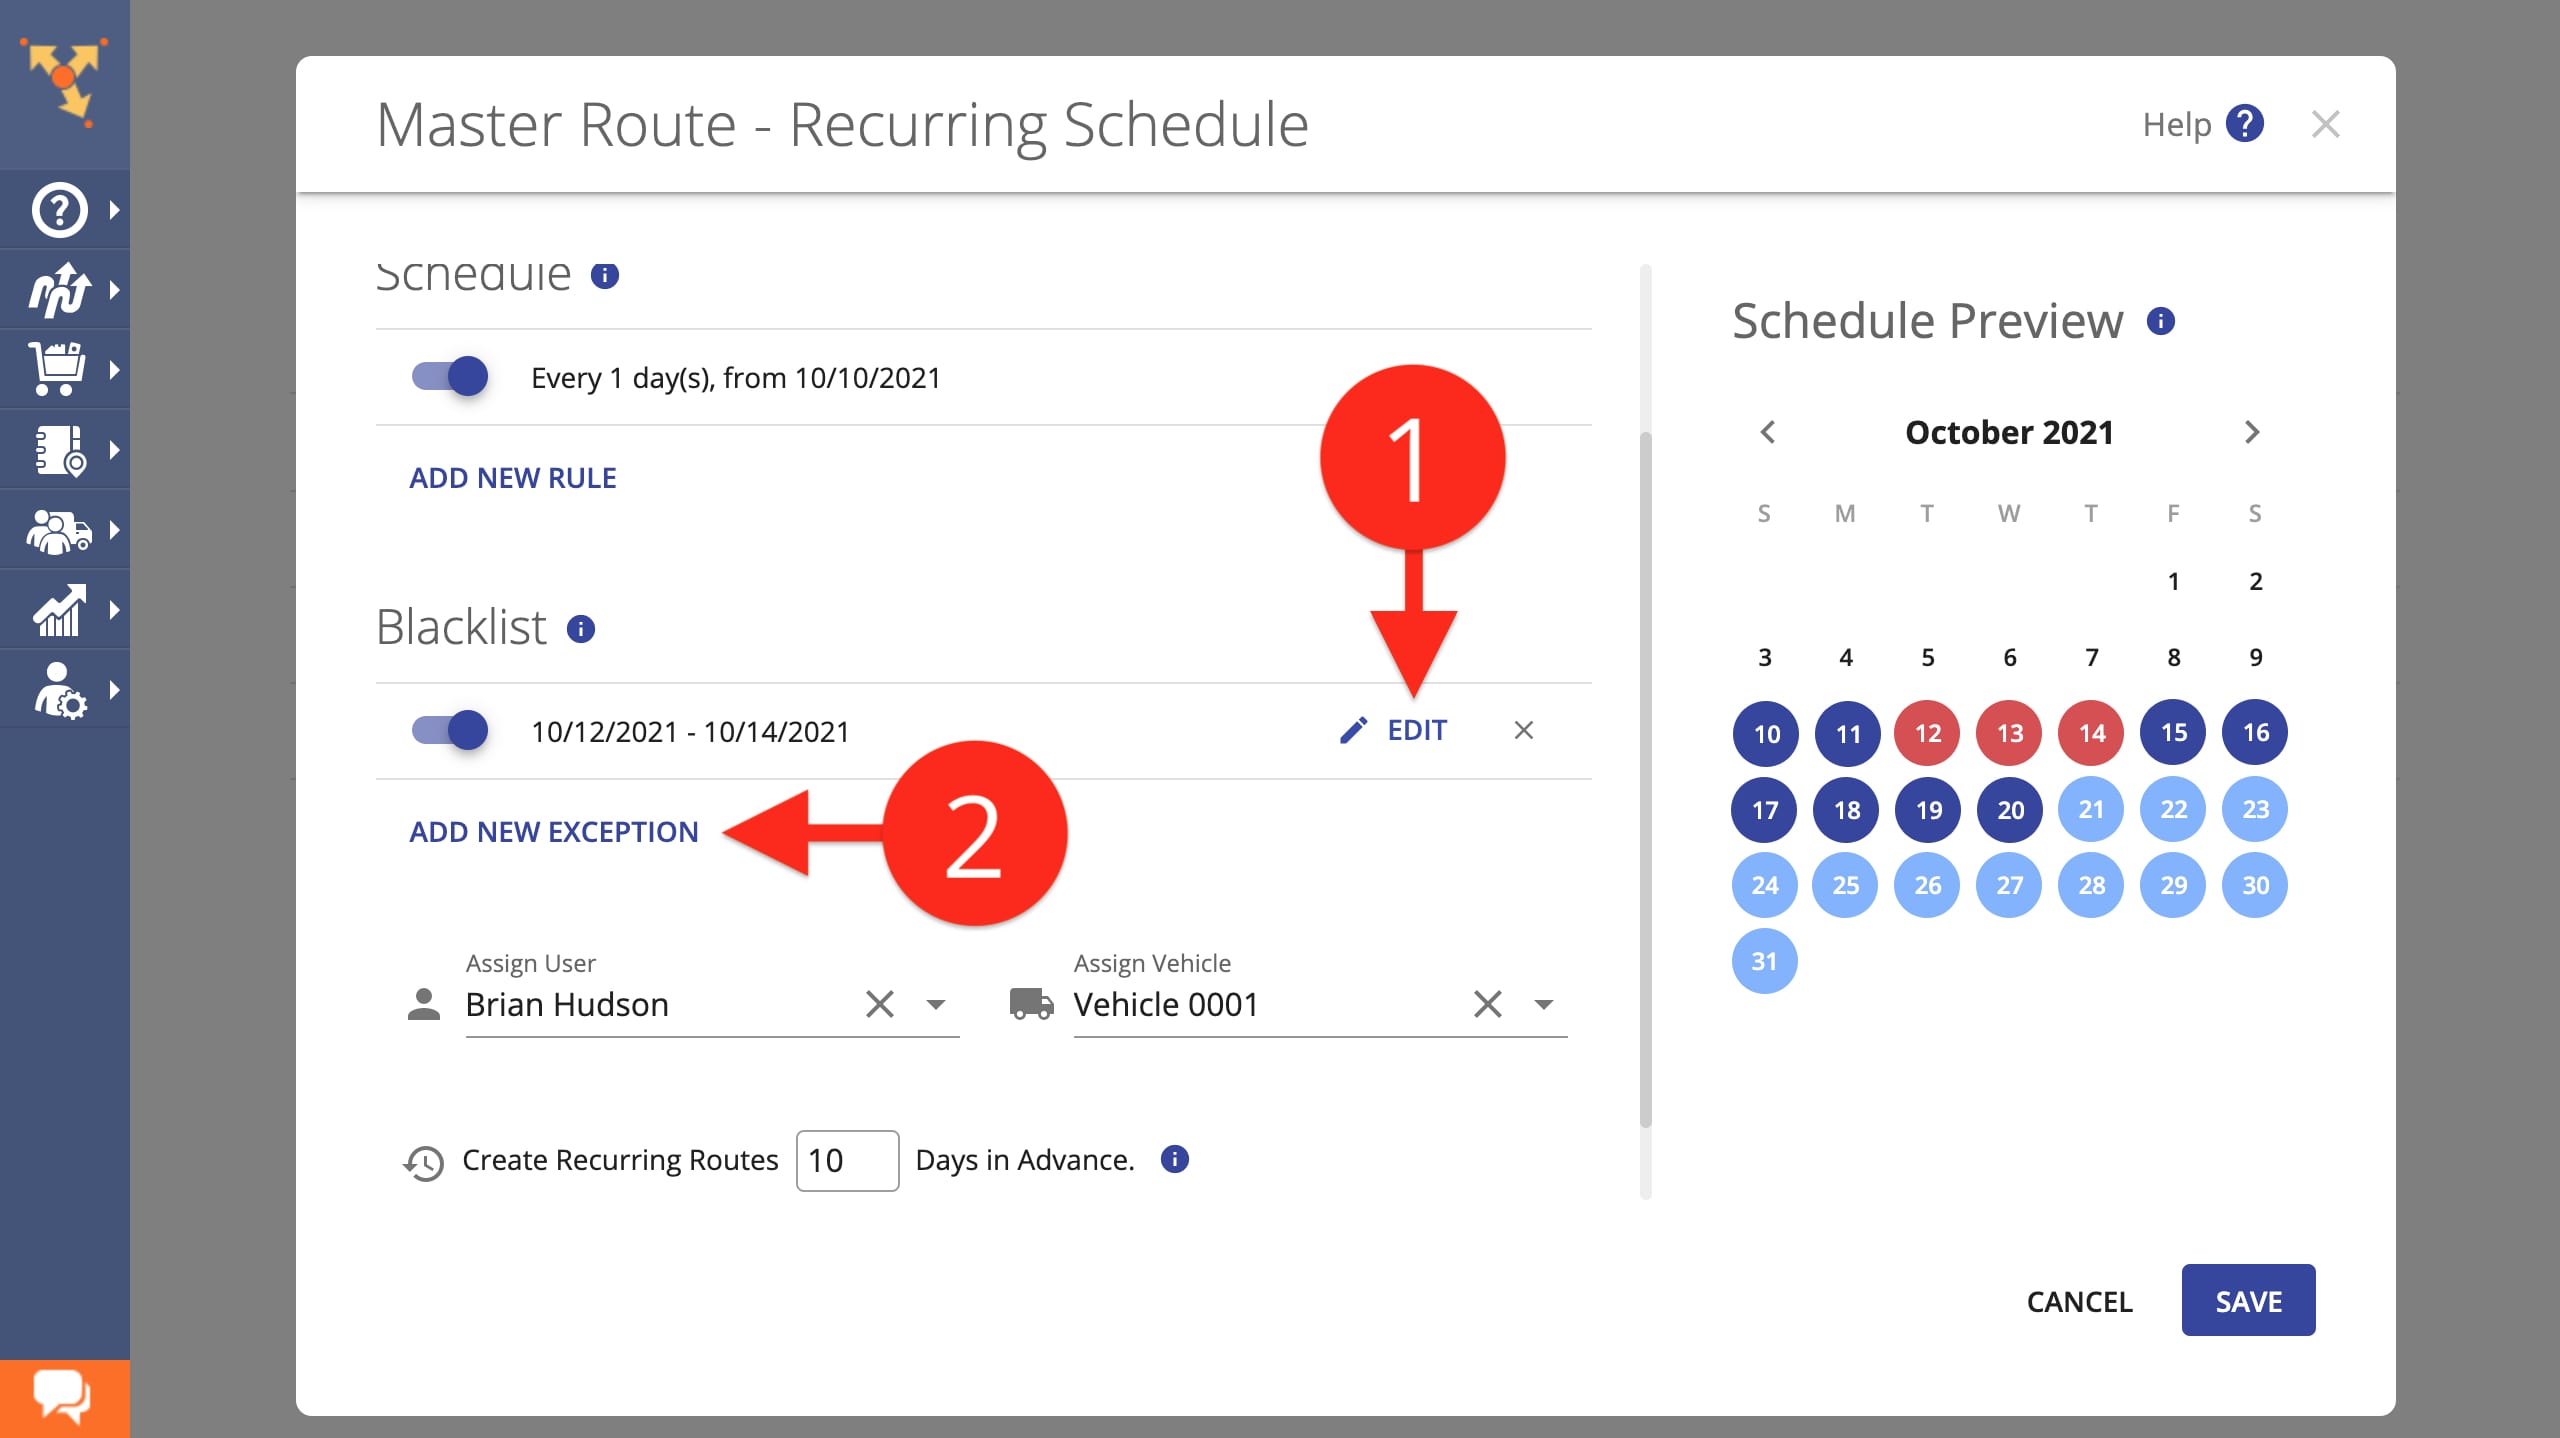 Recurring schedule exceptions allow you to blacklist dates for creating recurring driver routes.